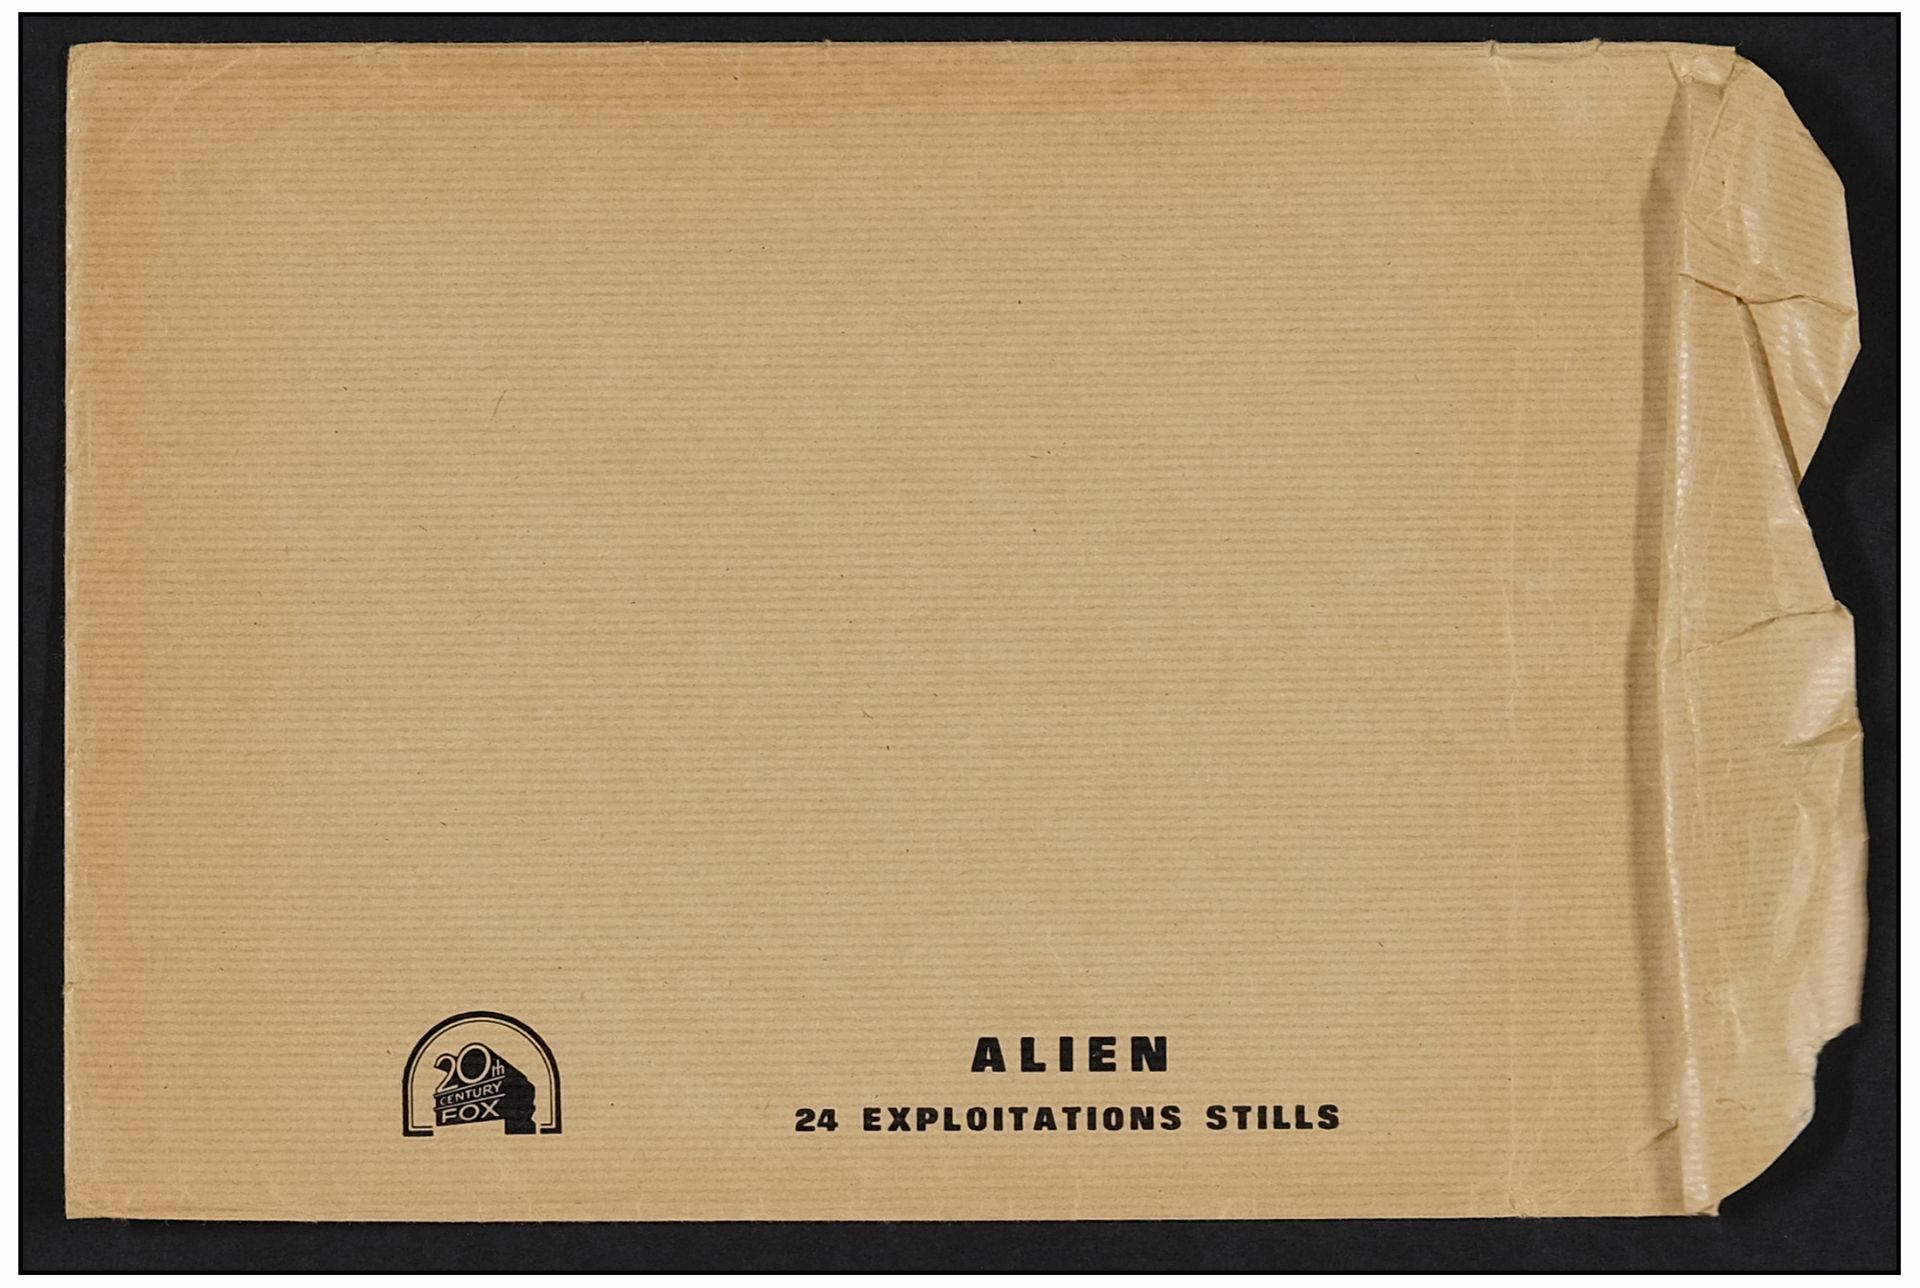 ALIEN - German Lobby Card Set of (24) and Envelope (8.5" x 10.75"); Fine+ - Image 2 of 2